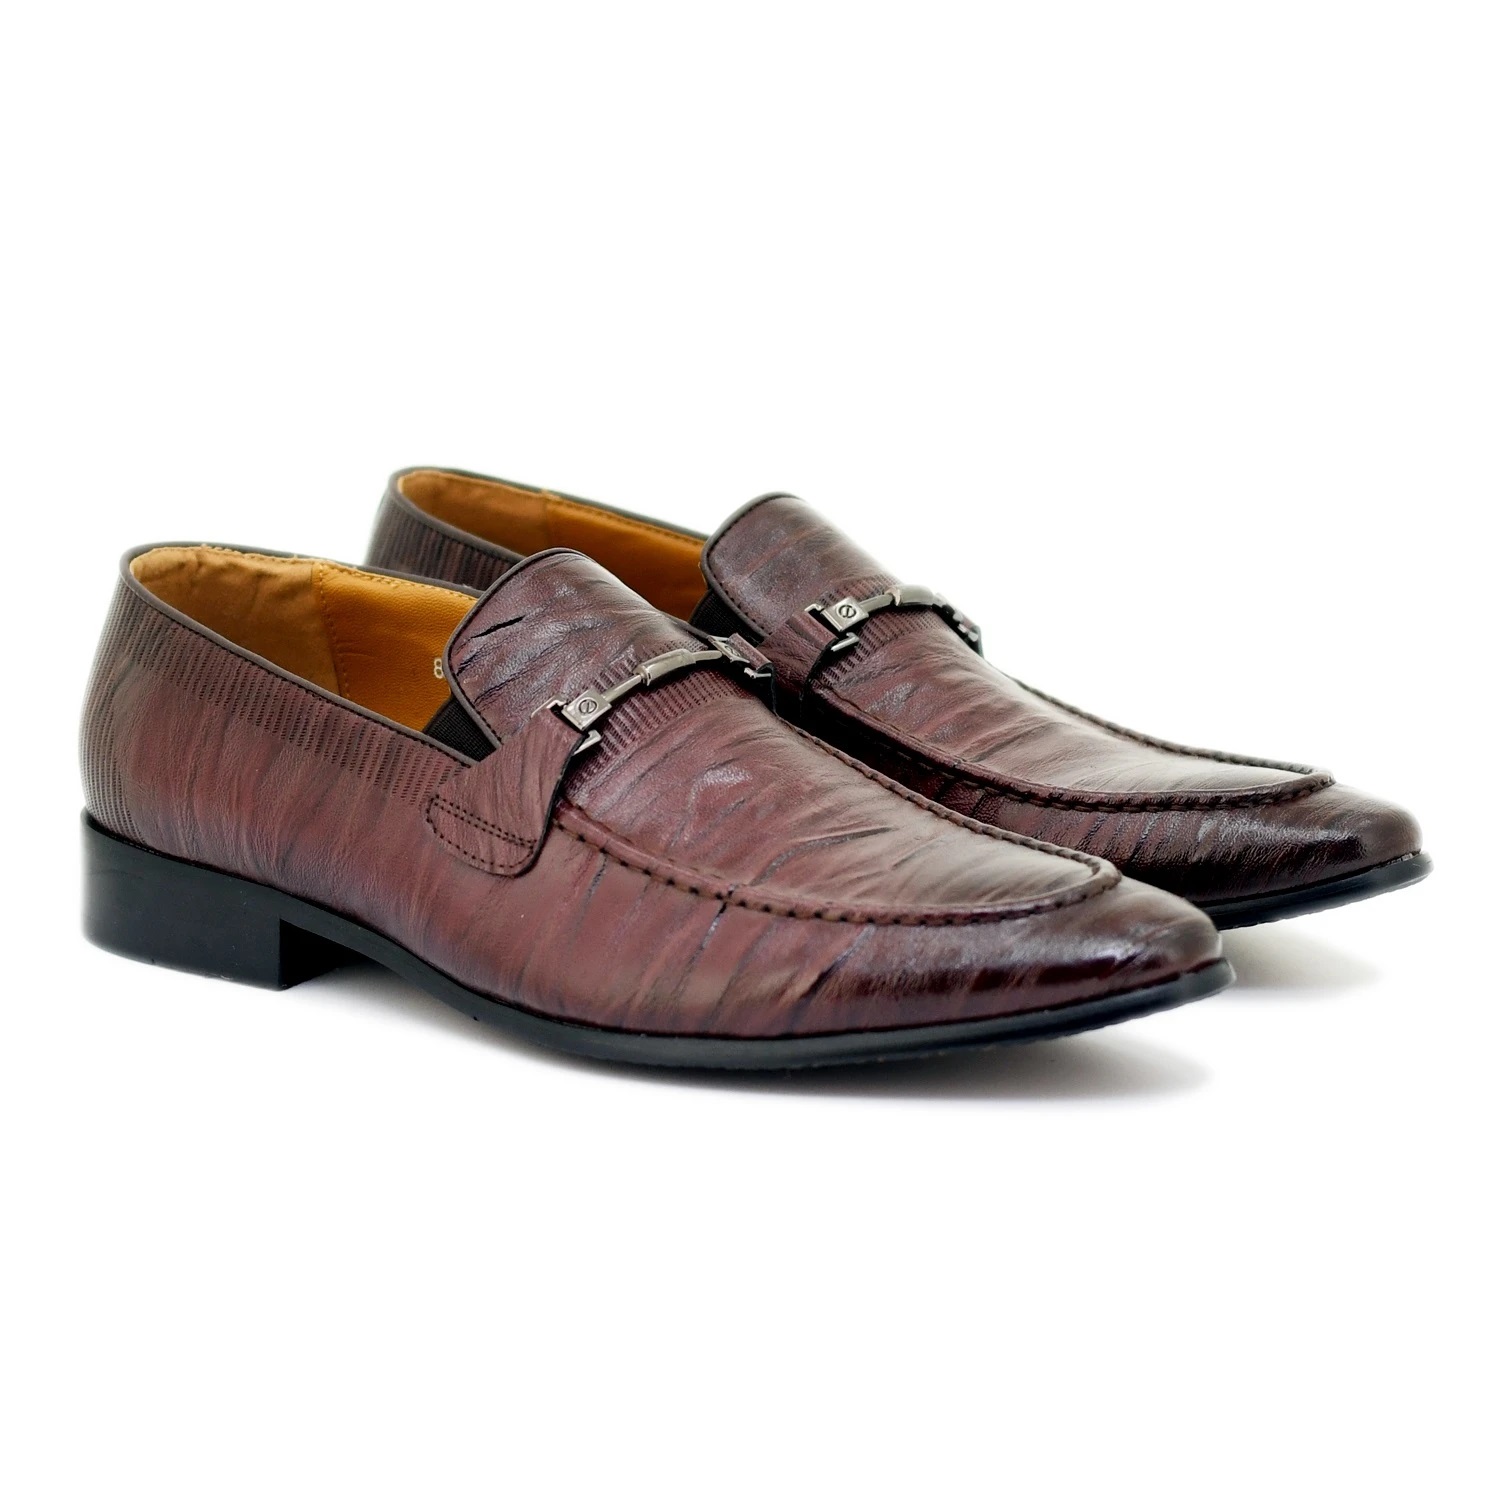 Latest Mens Formal Shoes in Pakistan: Best Pakistani Brands to Choose